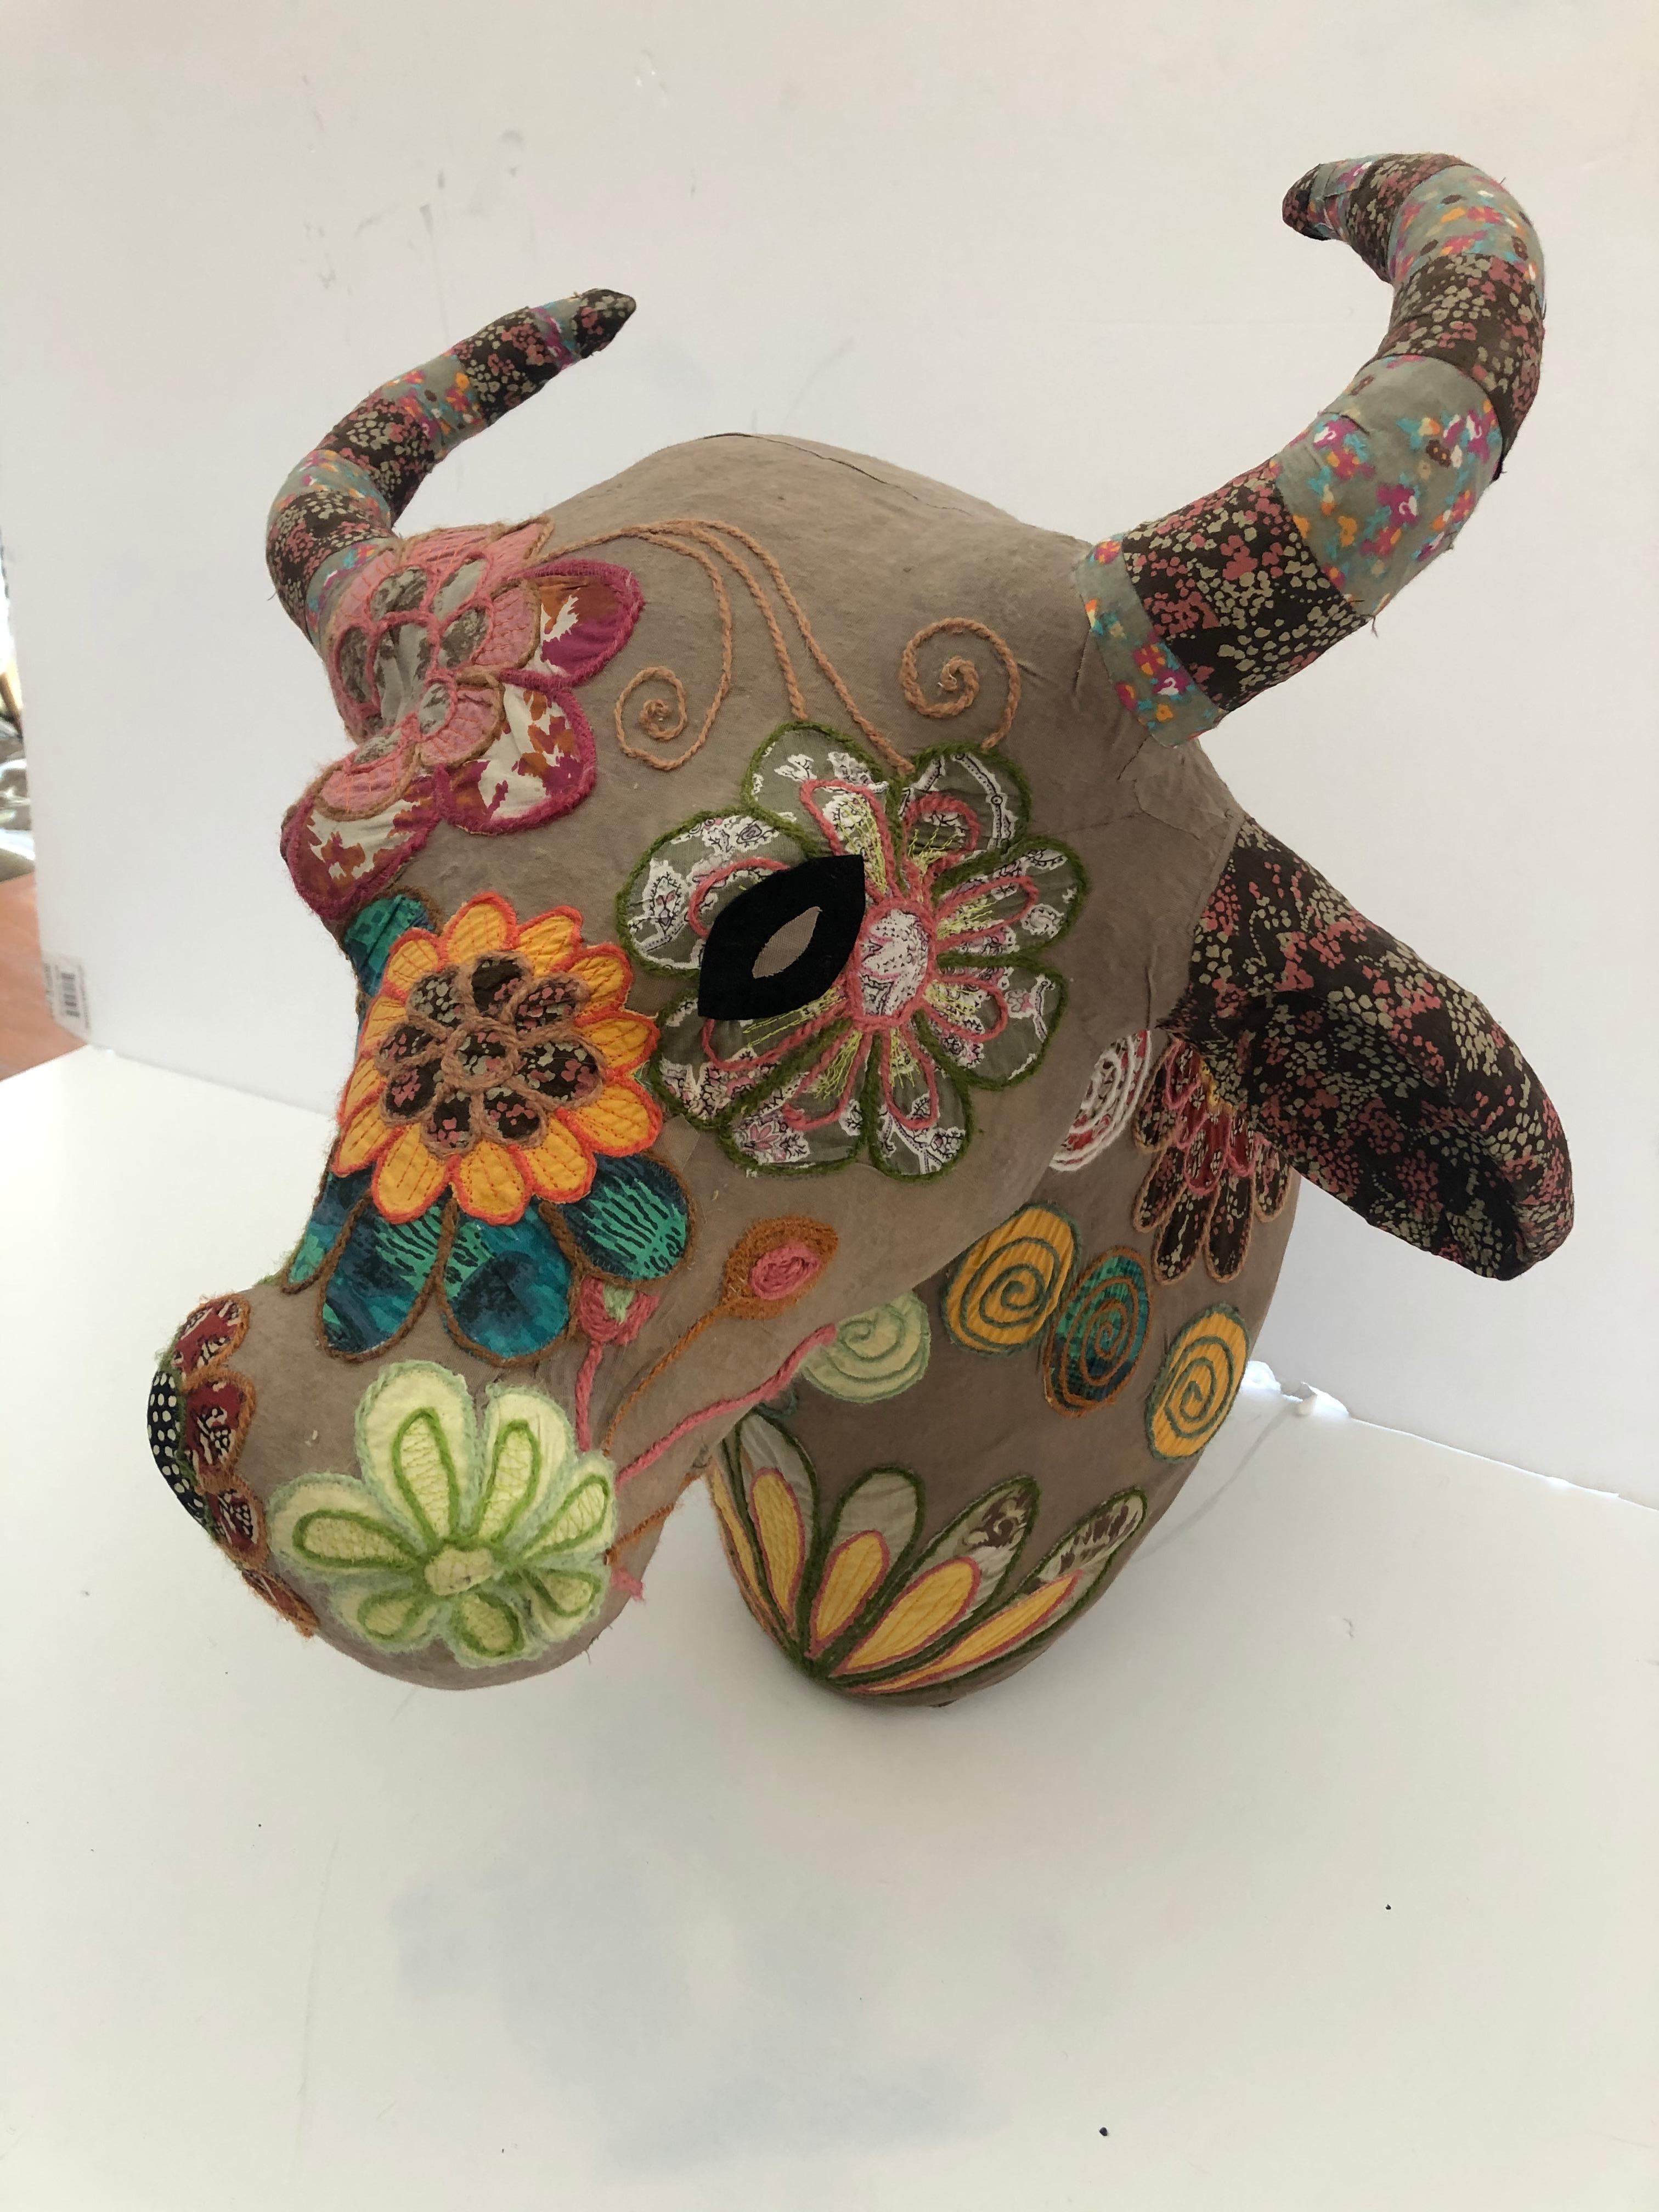 American Whimsical Handmade Mixed-Media Wall Sculpture of Bull's Head with Horns